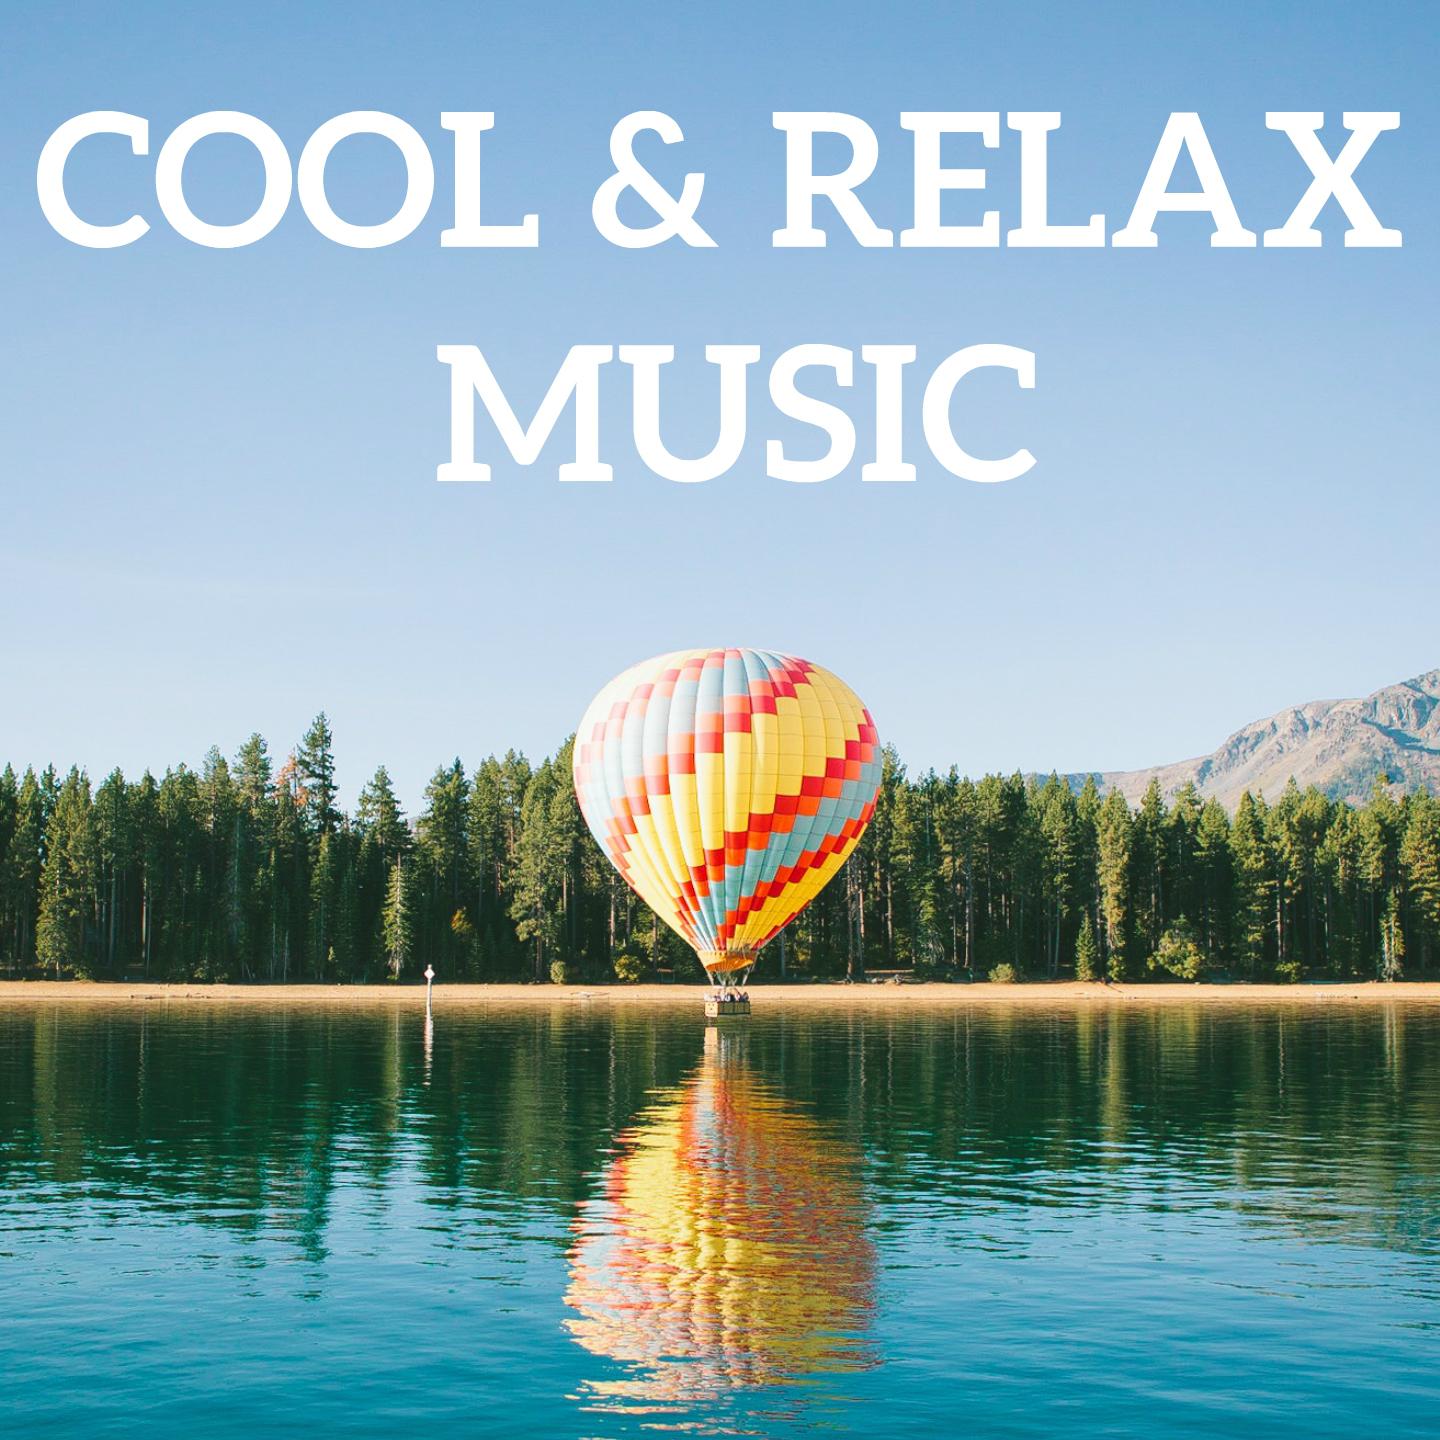 Cool & Relax Music